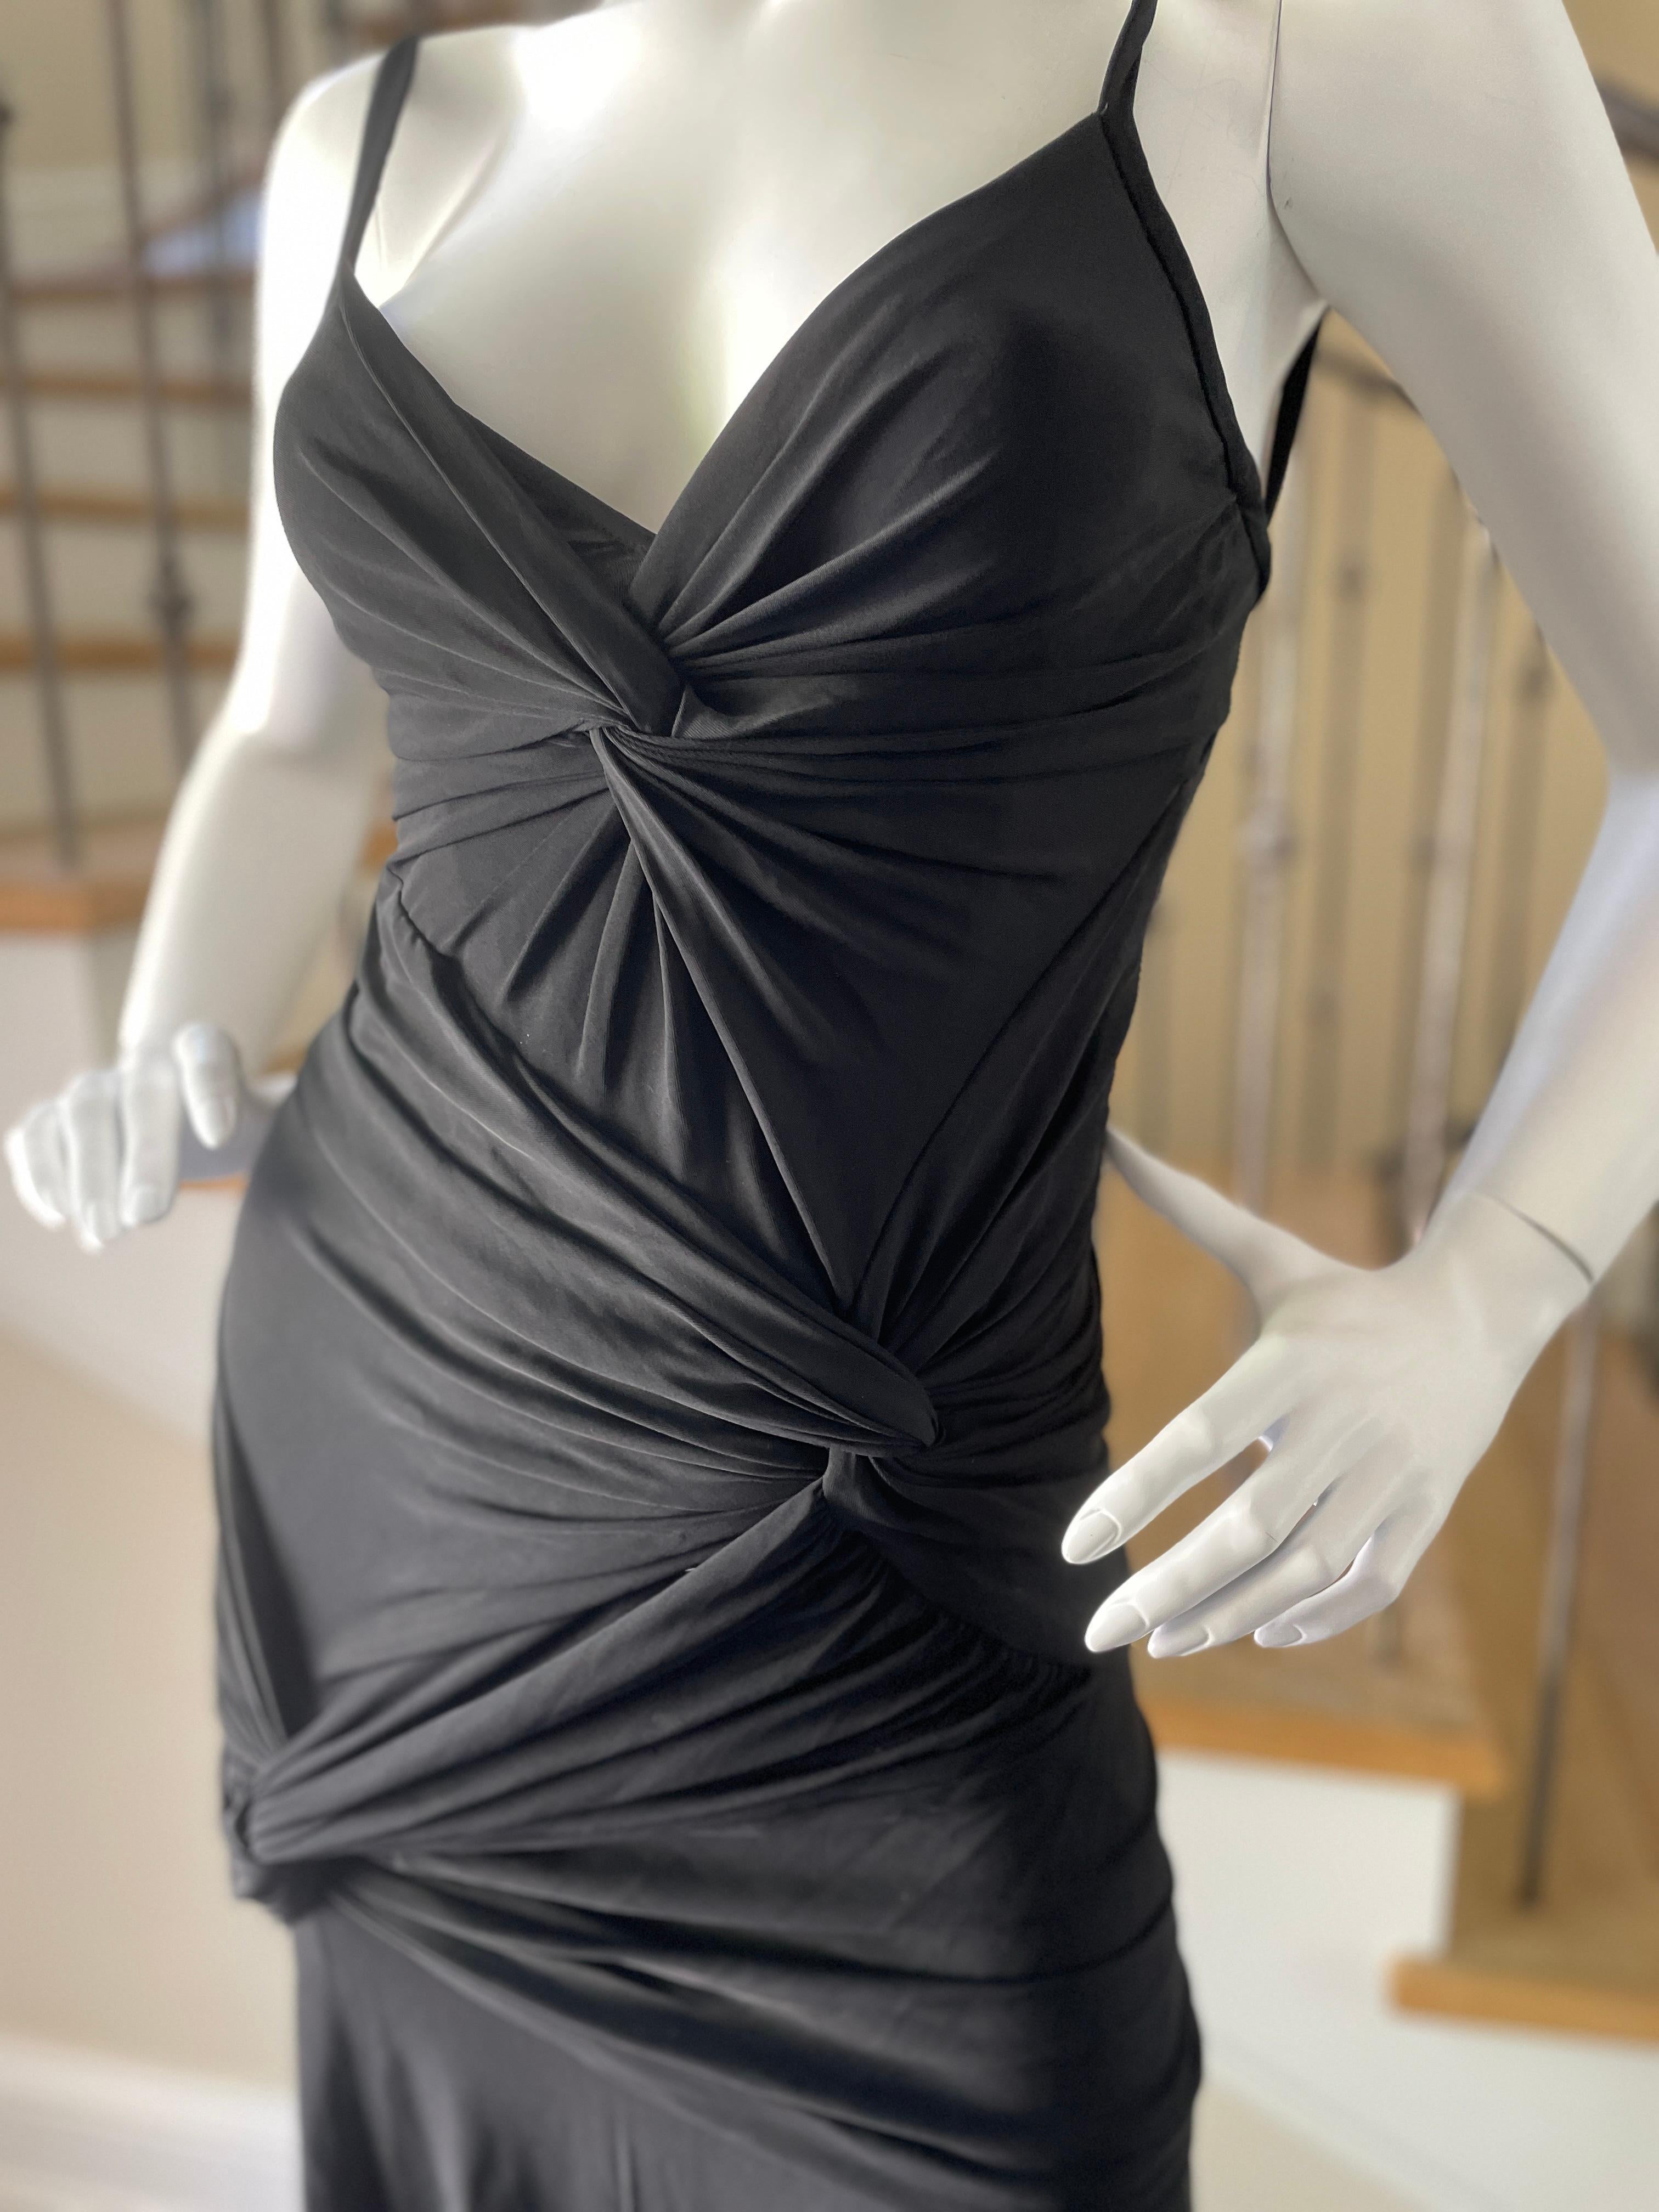 Donna Karan Vintage 1990's Plunging Black Knot Dress
Size M, there is a lot of stretch.
Bust 34